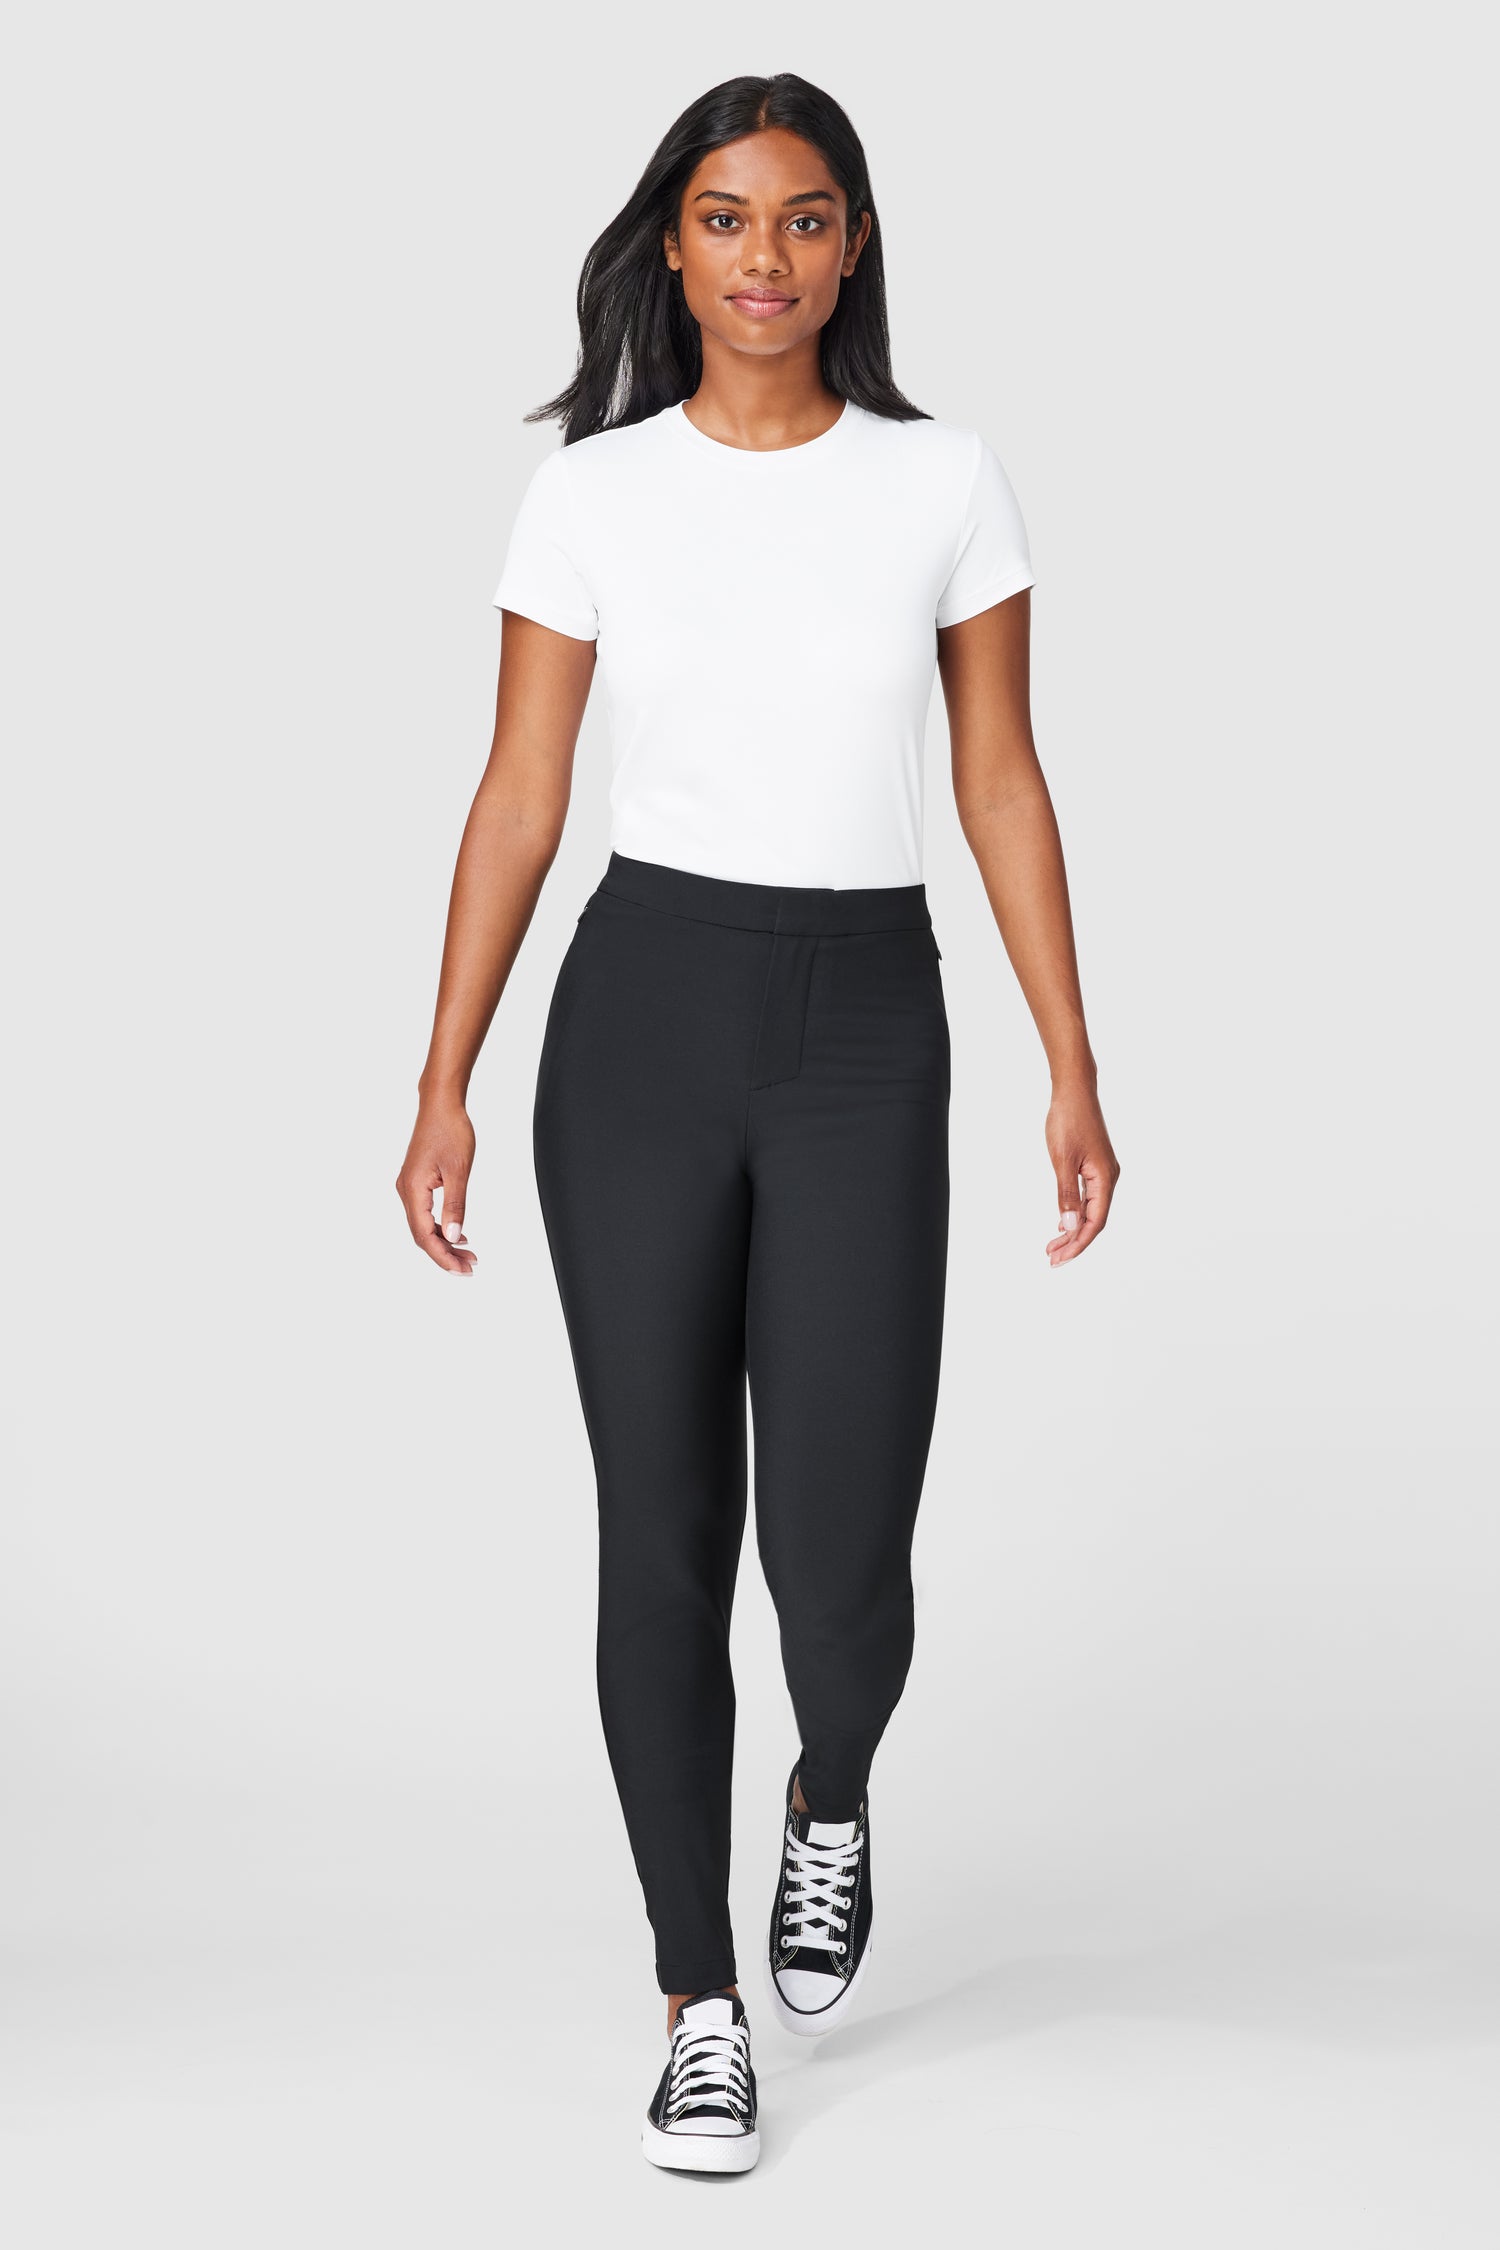 Friday FWD Women's Travel Stretch Tapered Pant - FRIDAYFWD - KEYLOOK - 1